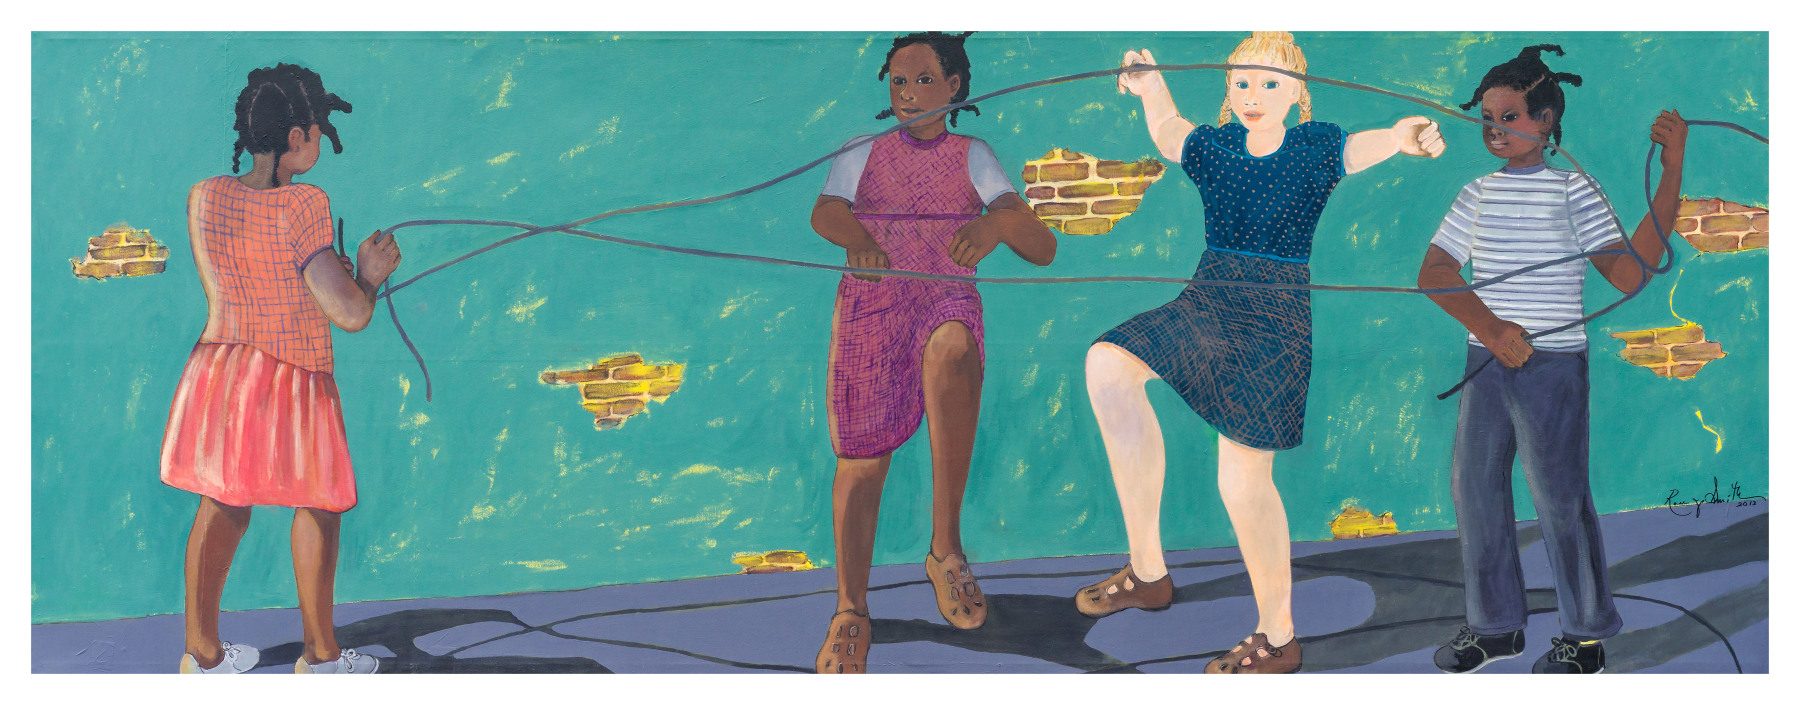 Double Dutch, 2013
Oil on canvas
36 x 96 inches